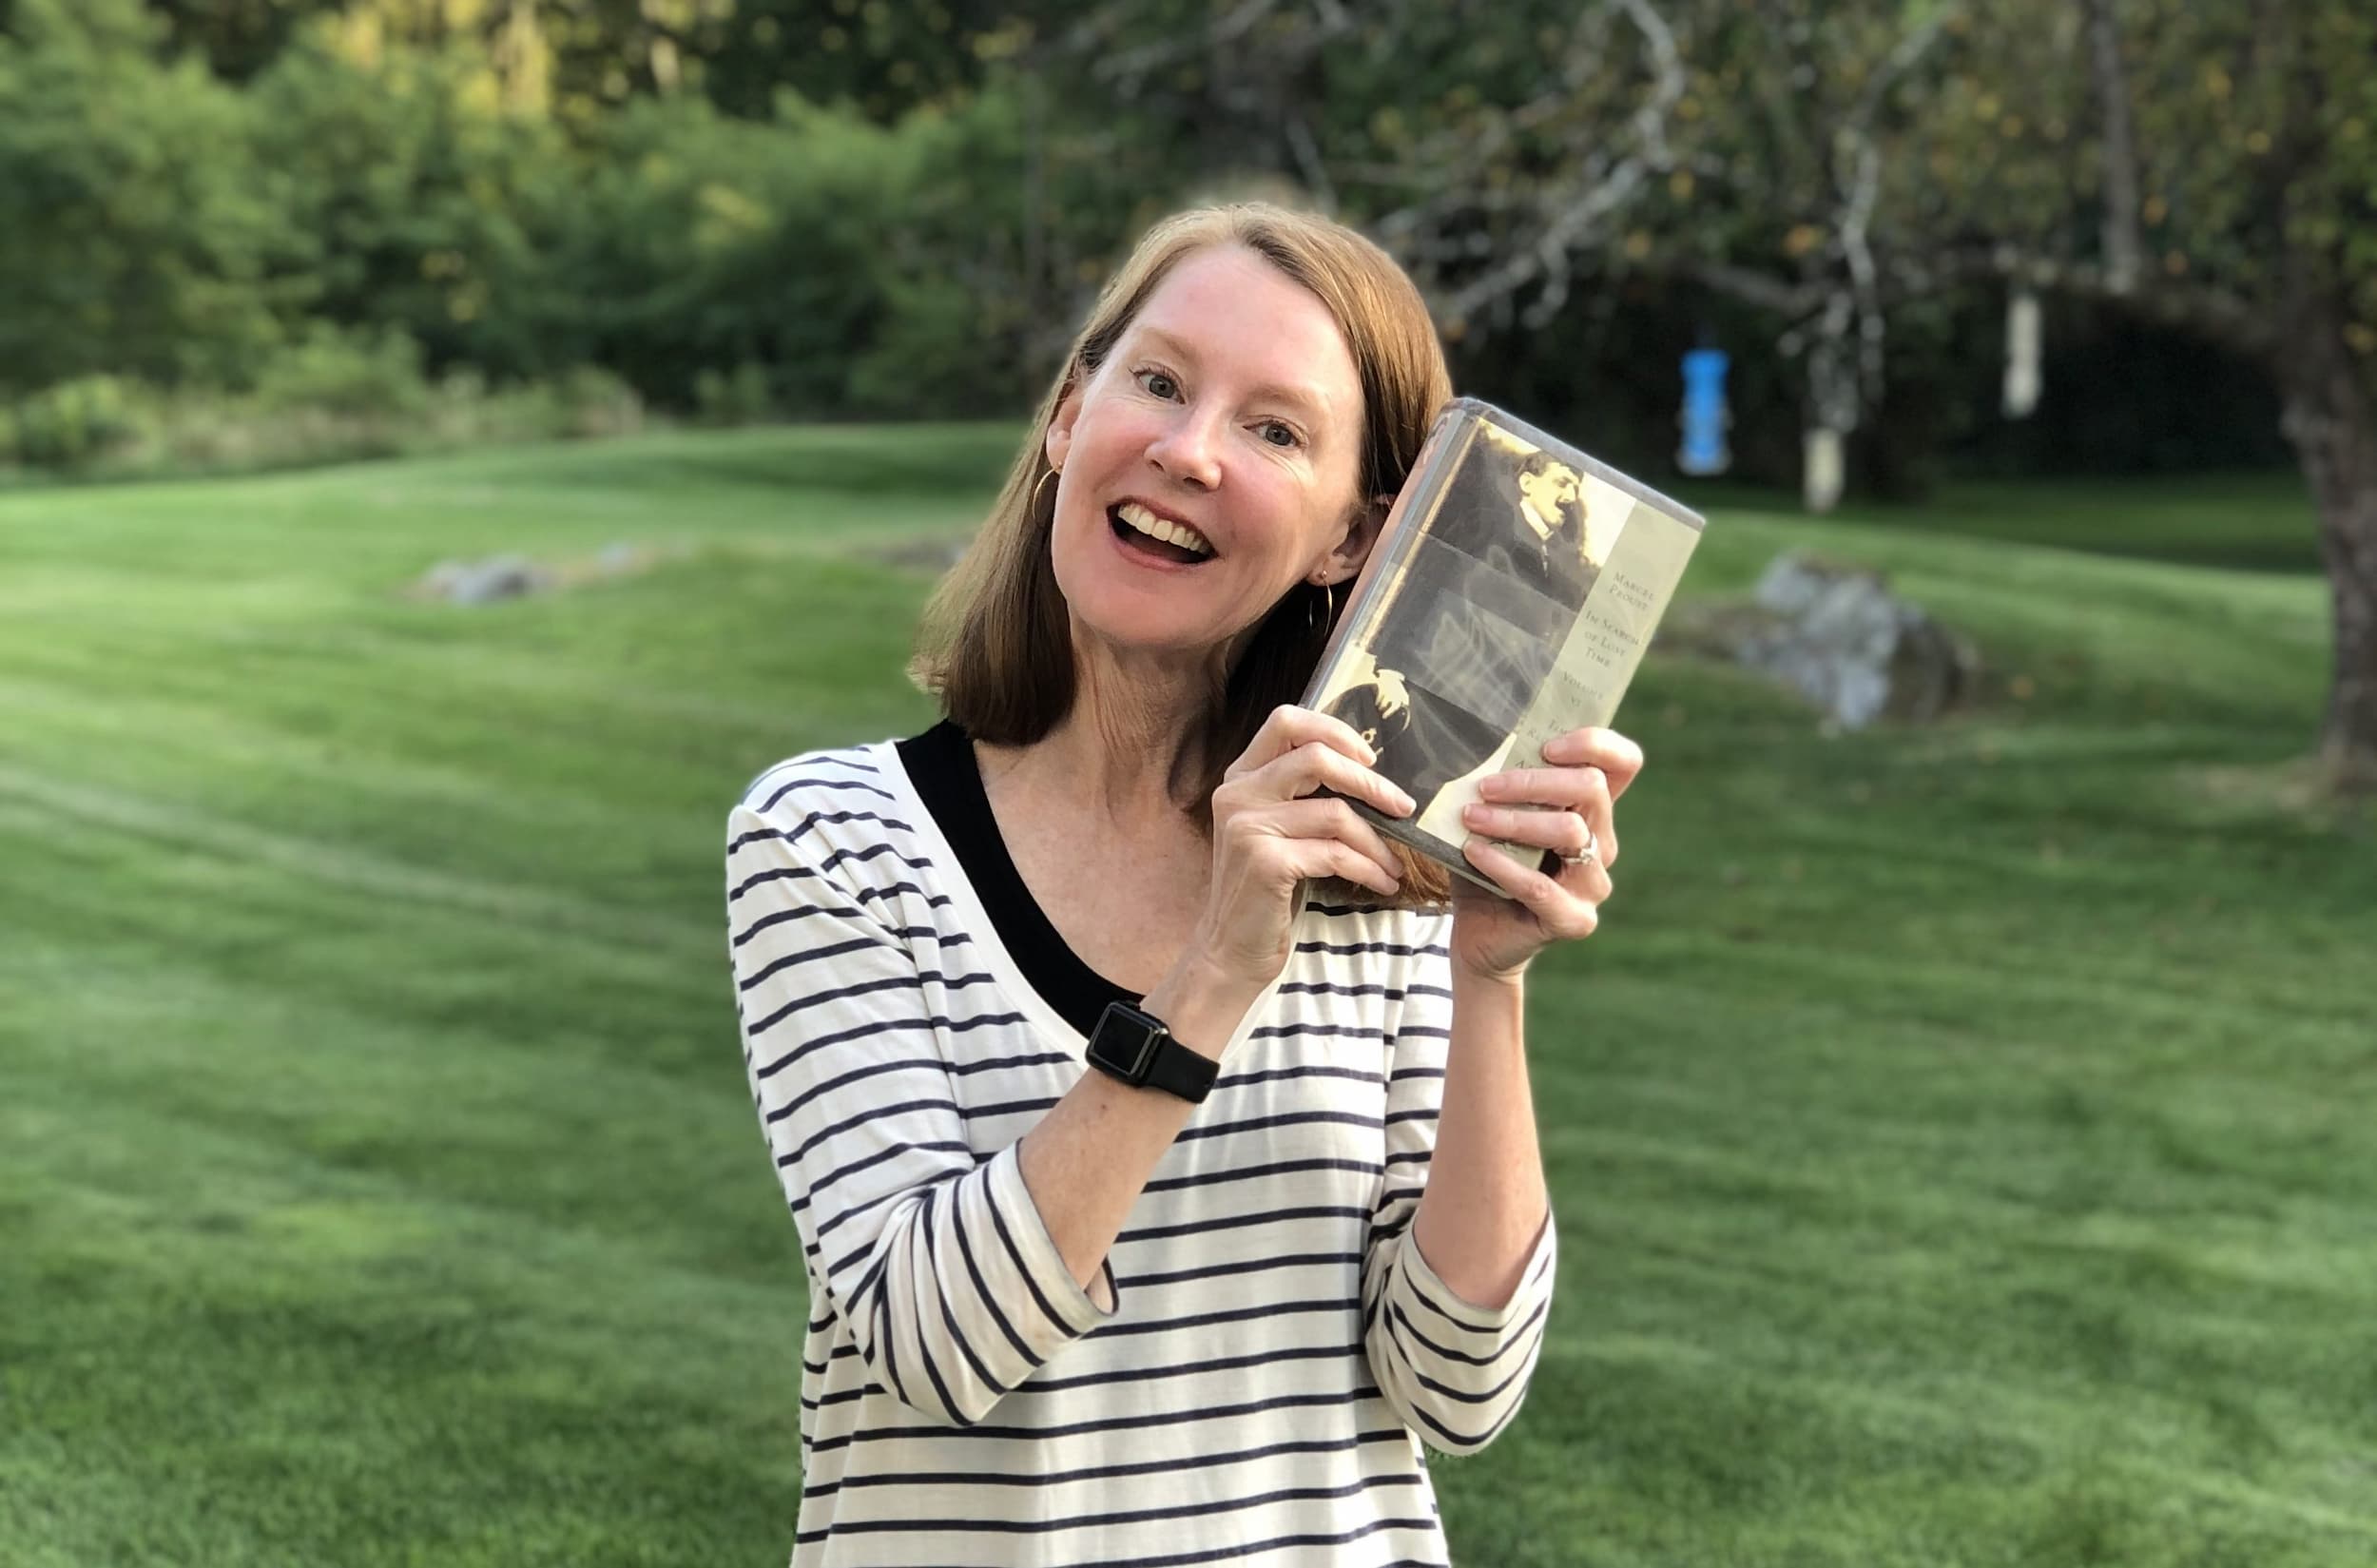 Gretchen holding a Proust book